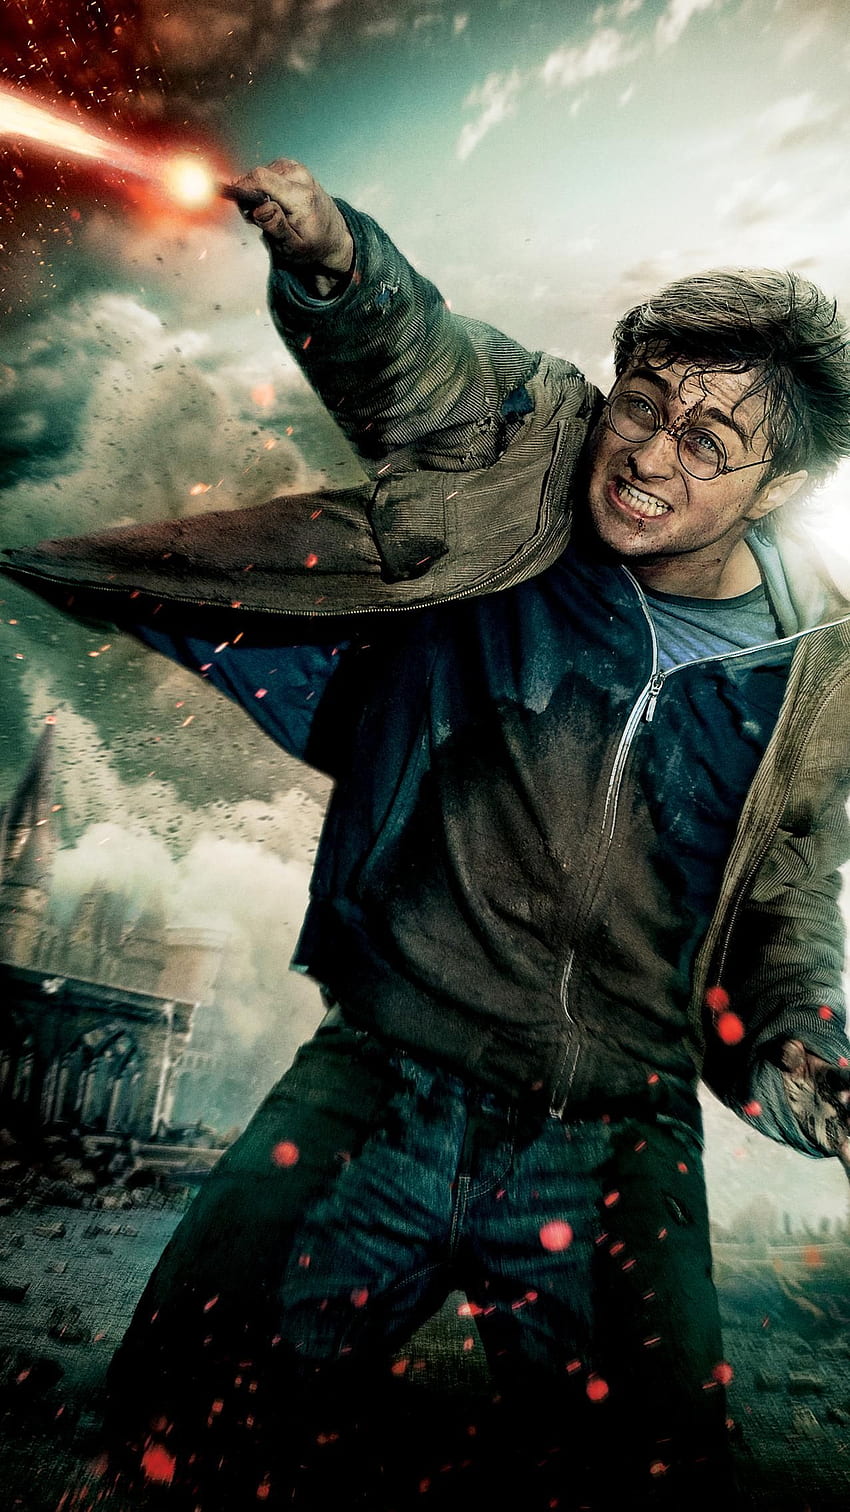 Harry Potter and the Deathly Hallows: Part 2 (2011) Phone . Moviemania. Daniel radcliffe harry potter, Harry potter hermione, Harry potter deathly hallows HD phone wallpaper